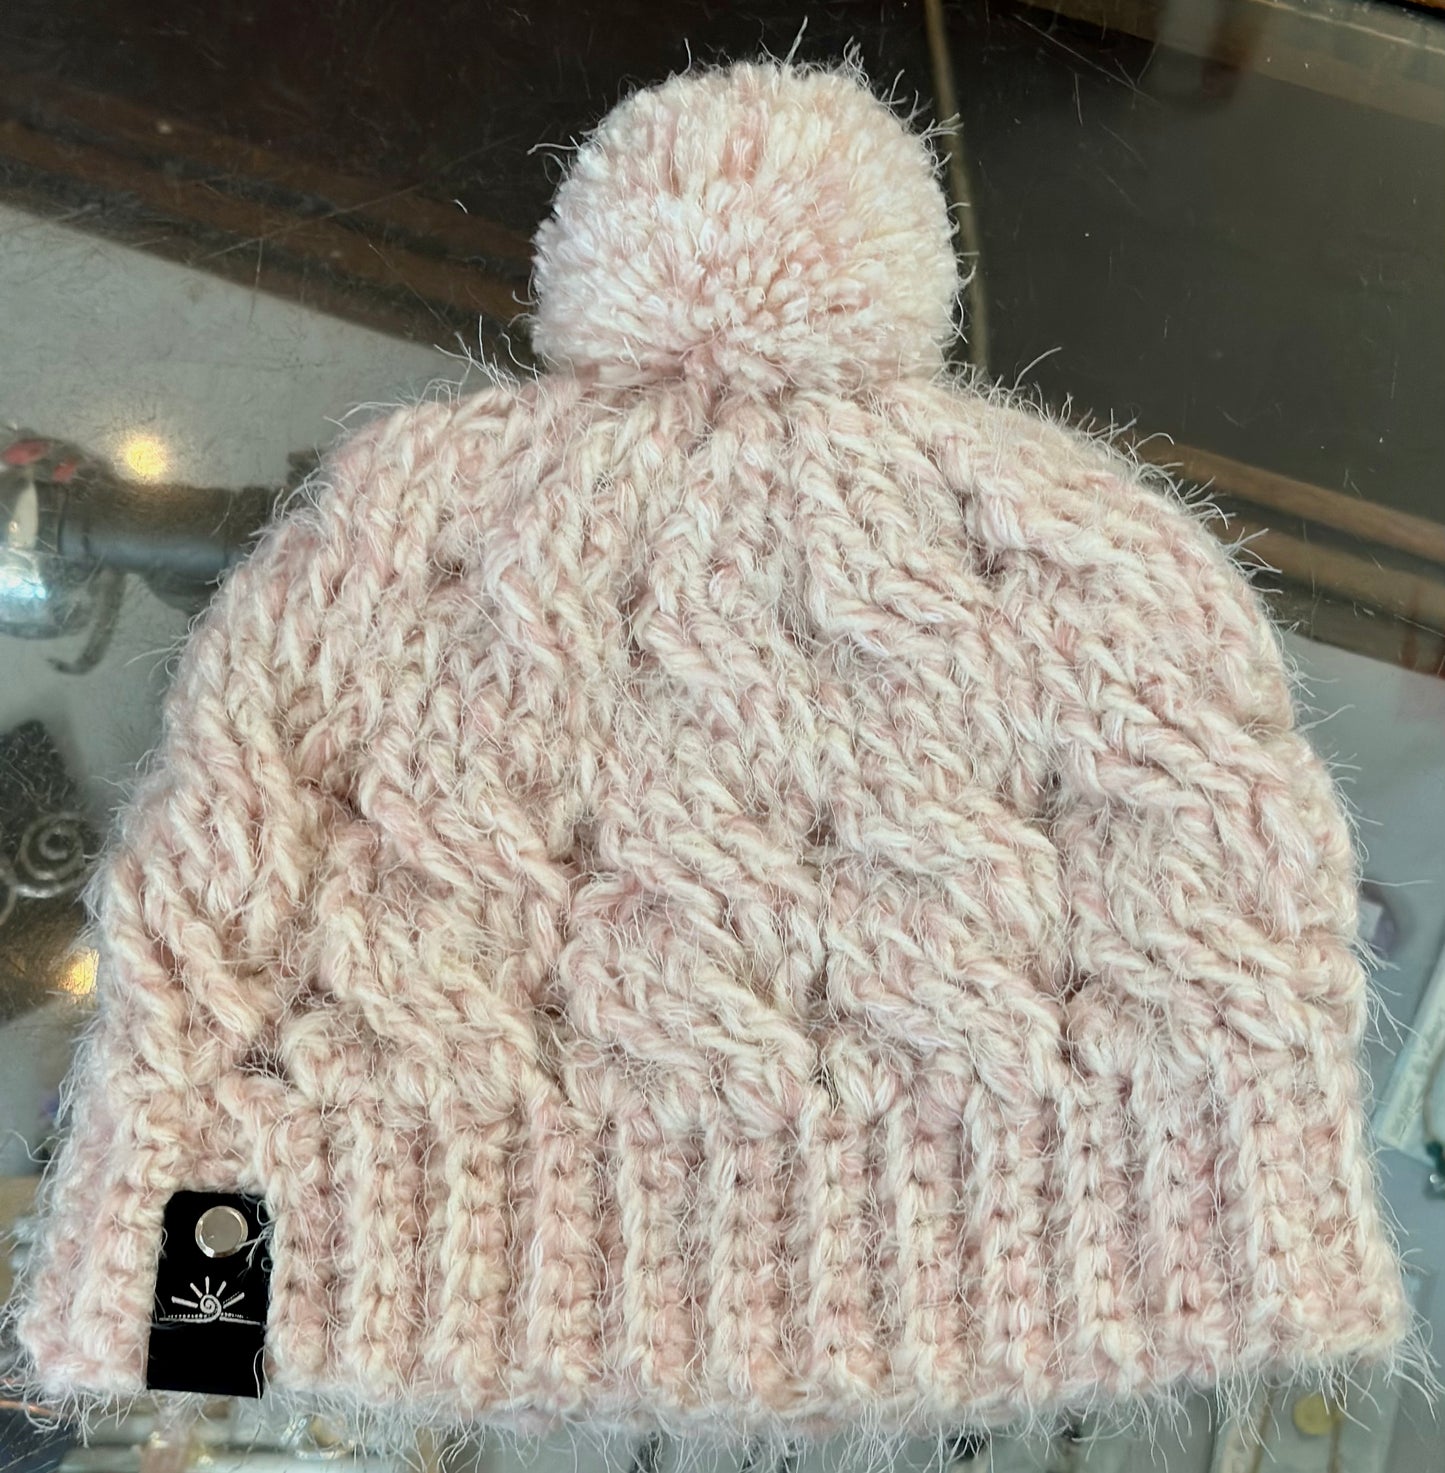 Soft and furry pink cable pom pom Crochet Hat